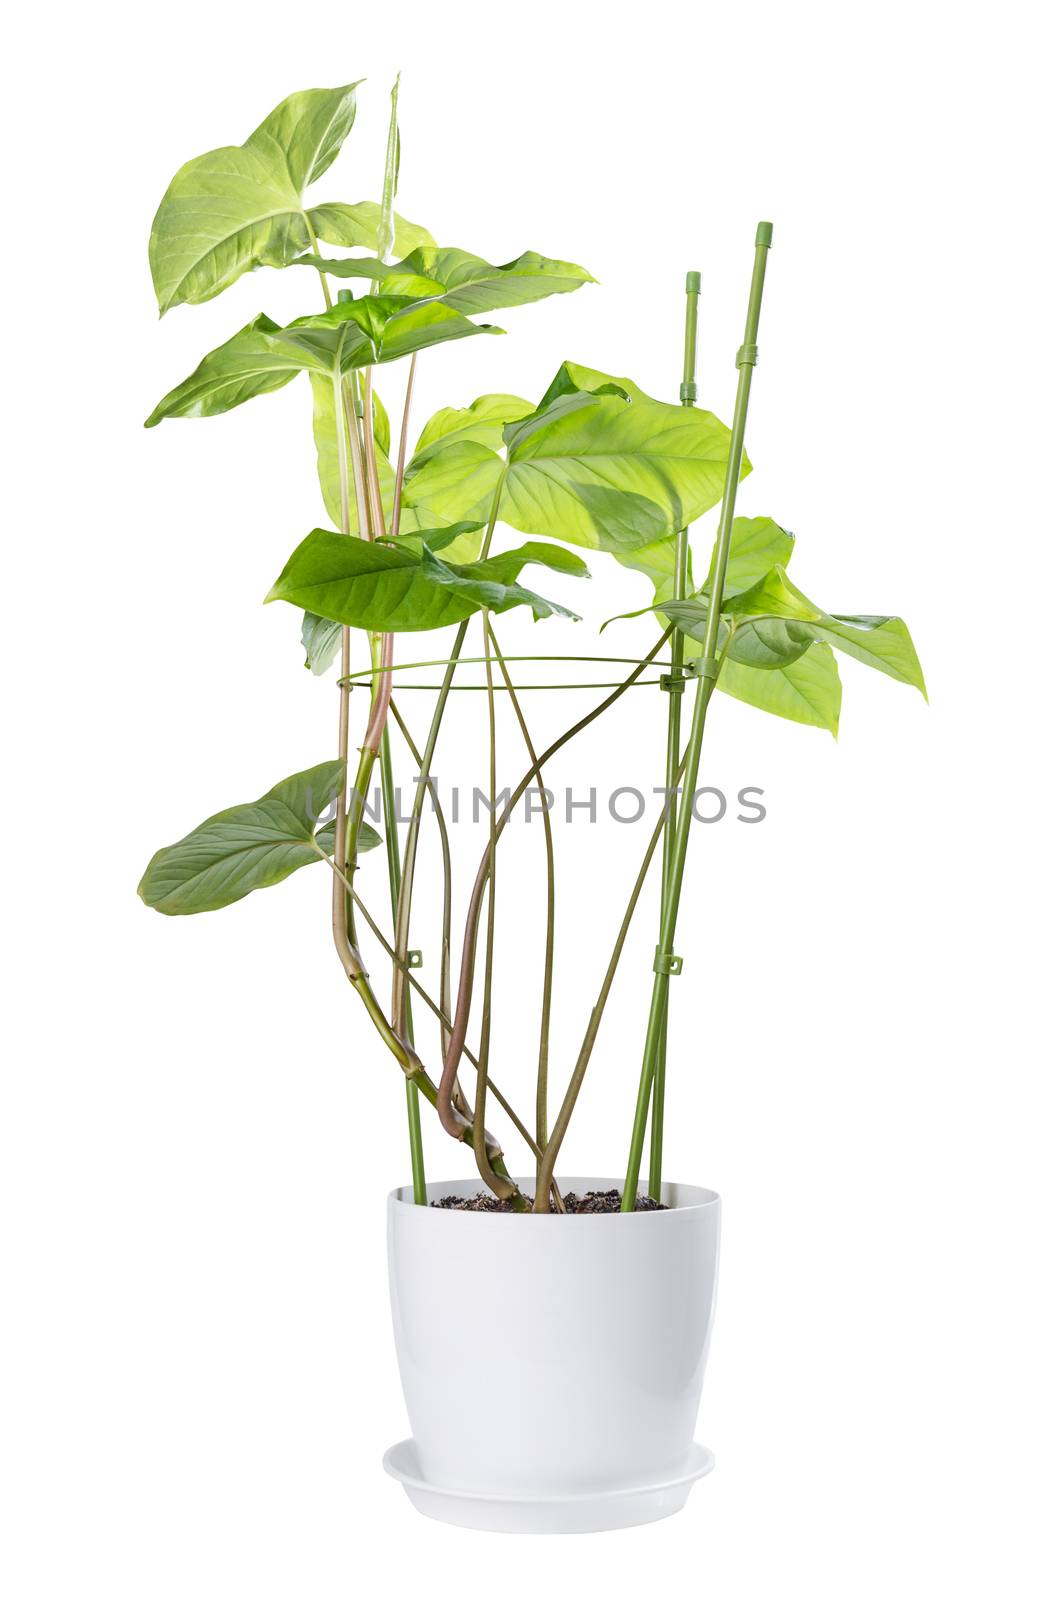 Syngonium in pot isolated on white background